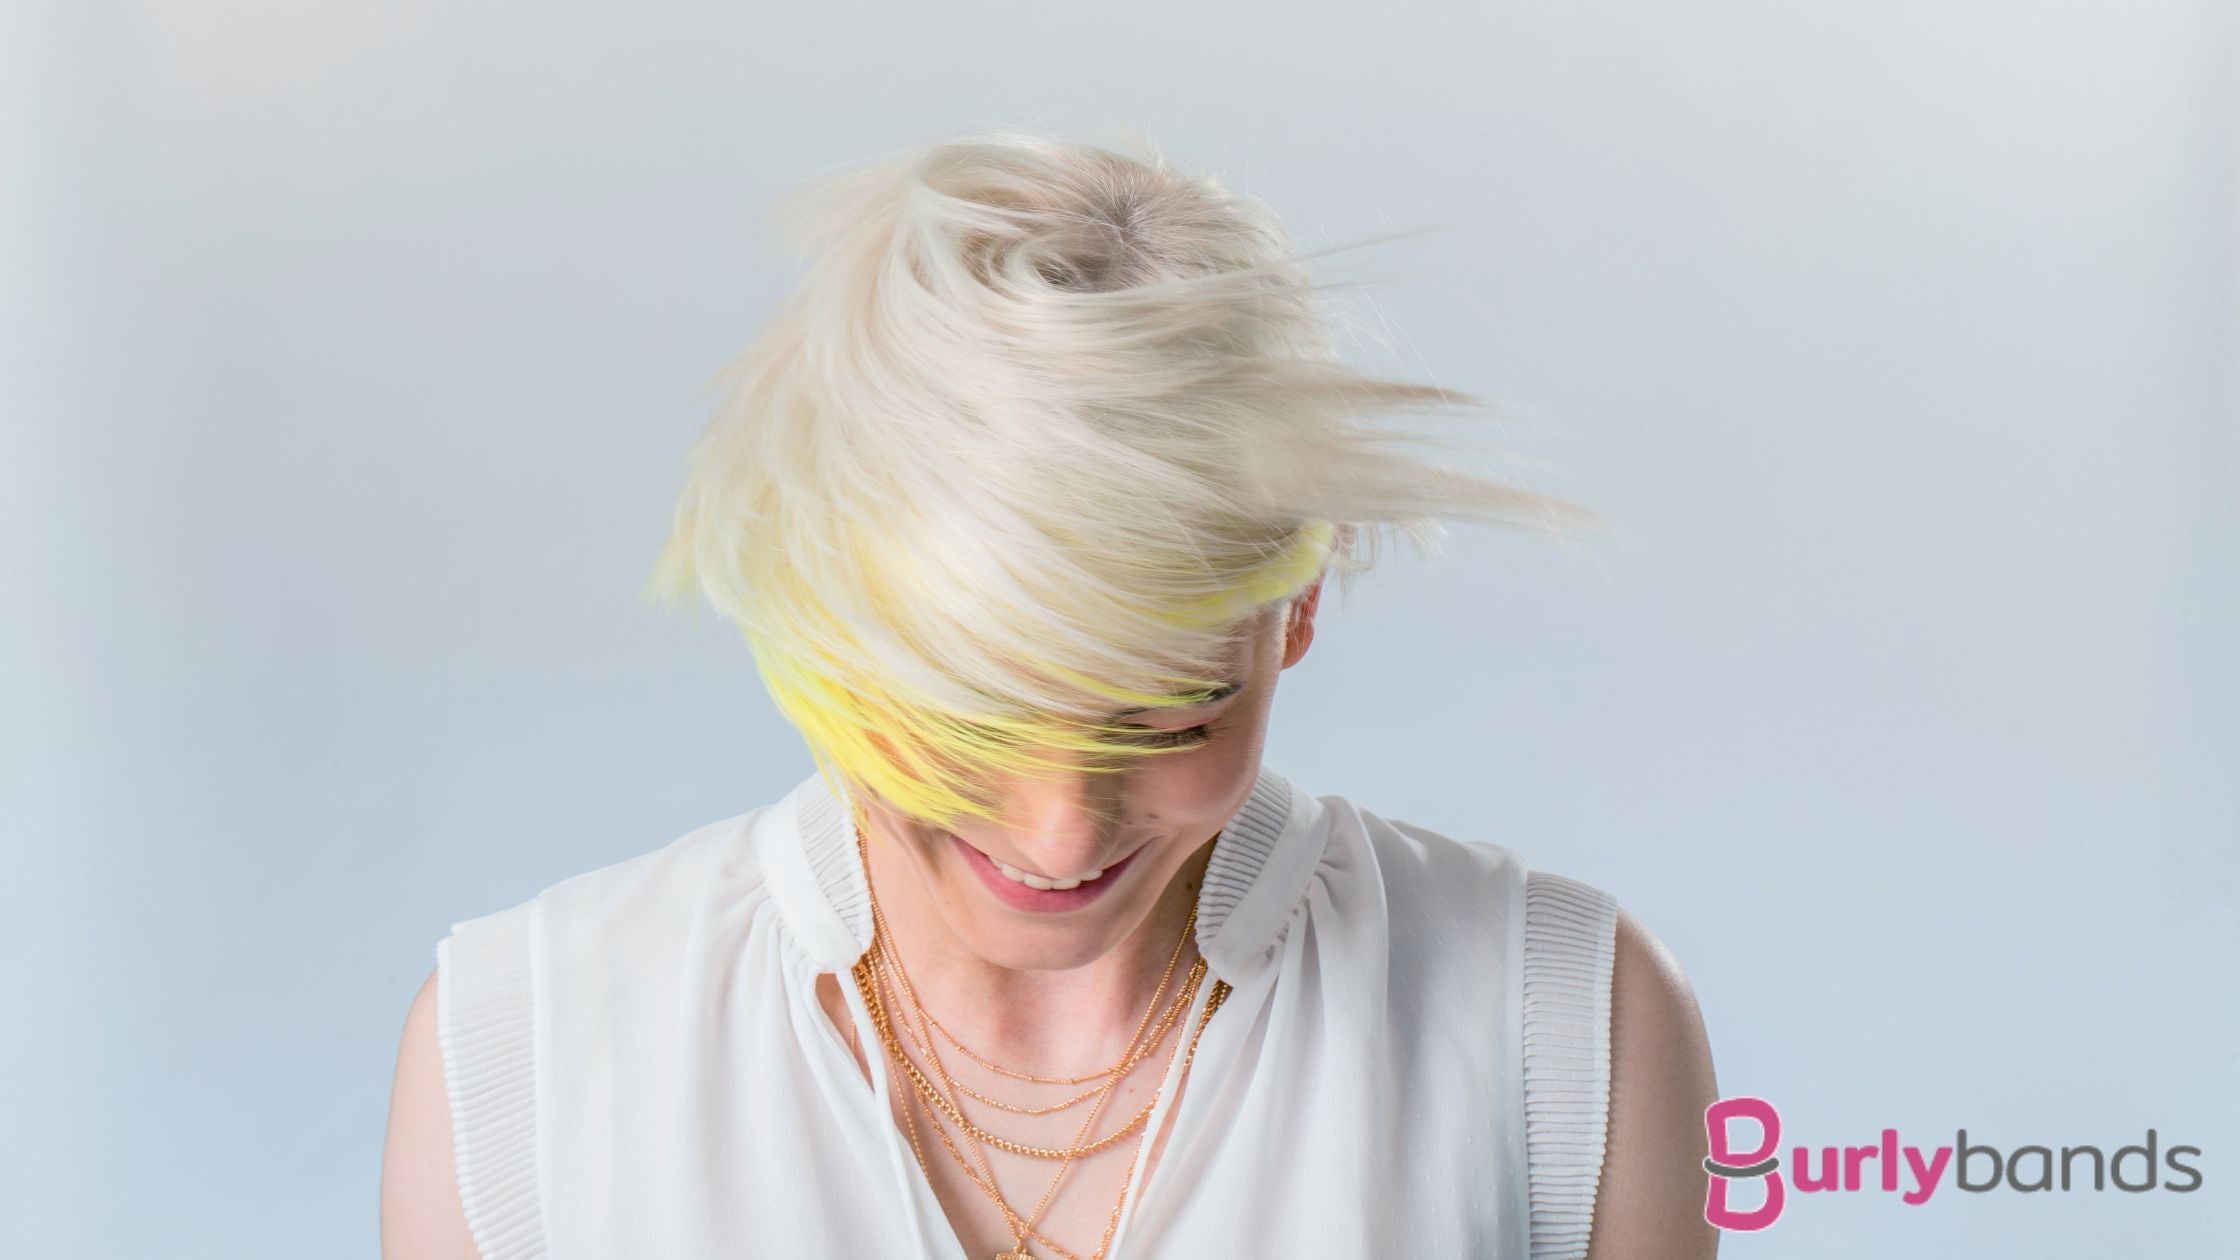 5. How to Repair and Restore Bleached Hair - wide 7